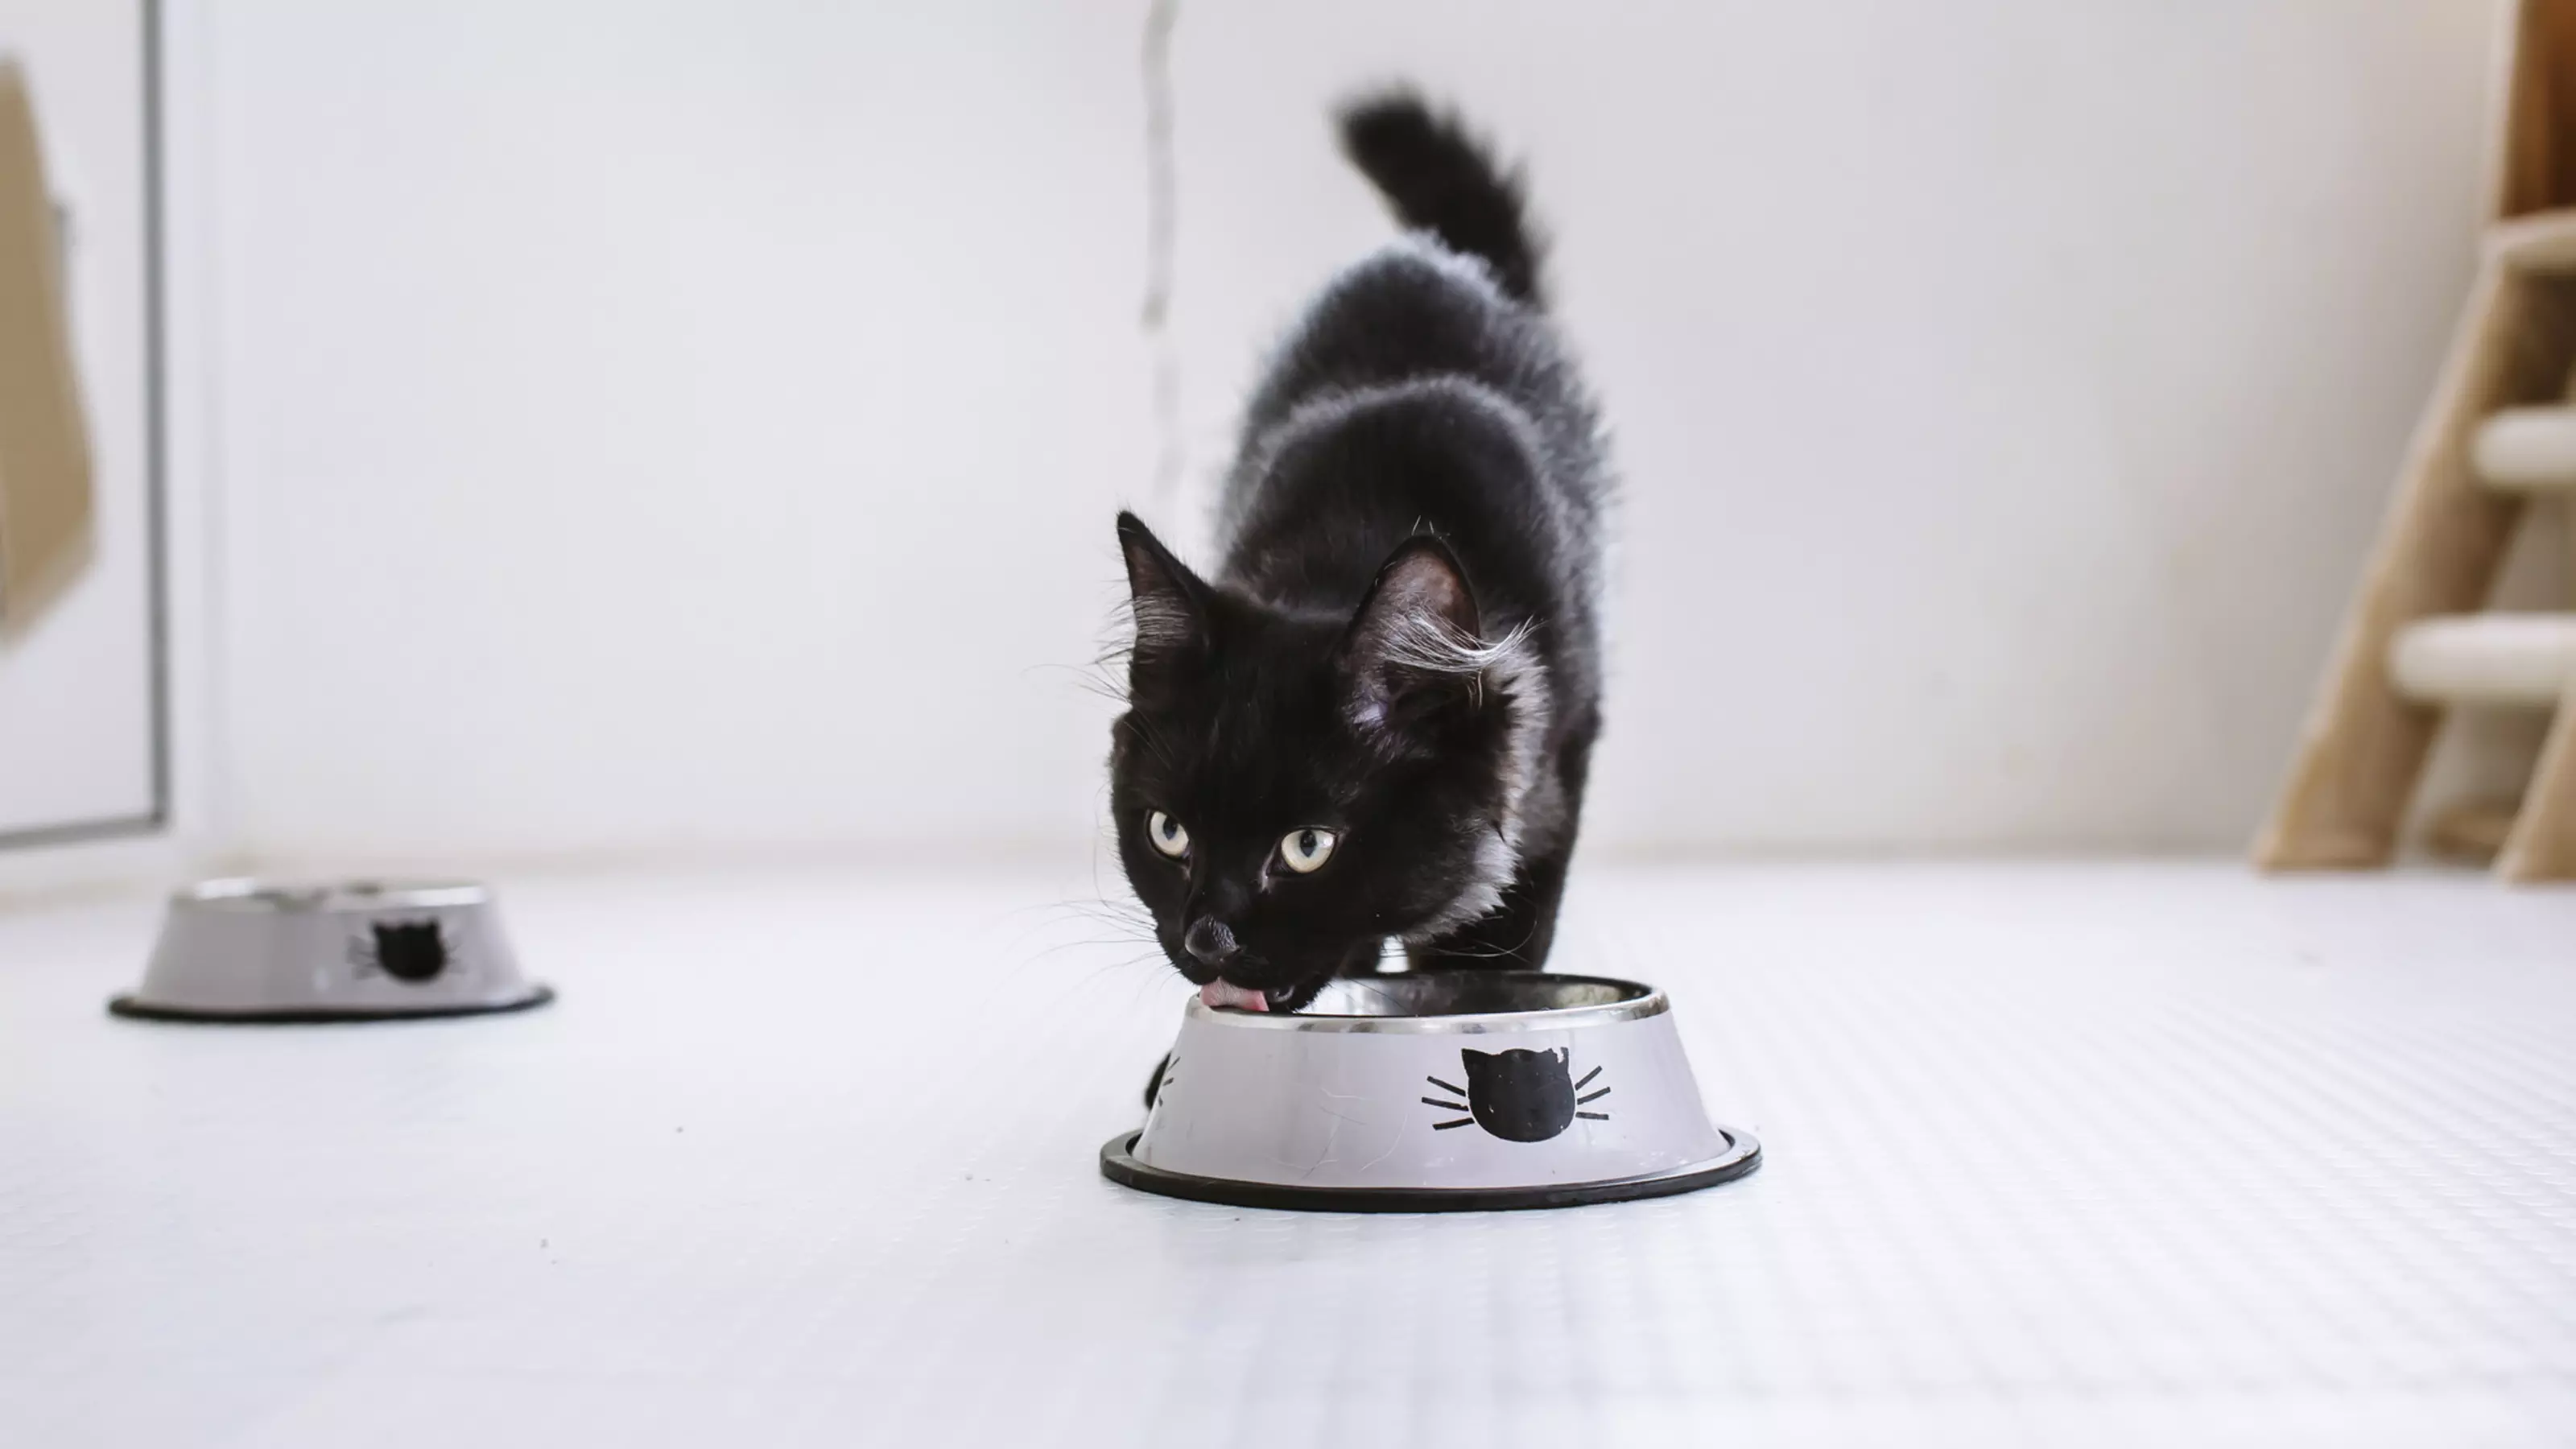 Black cat eating from bowl